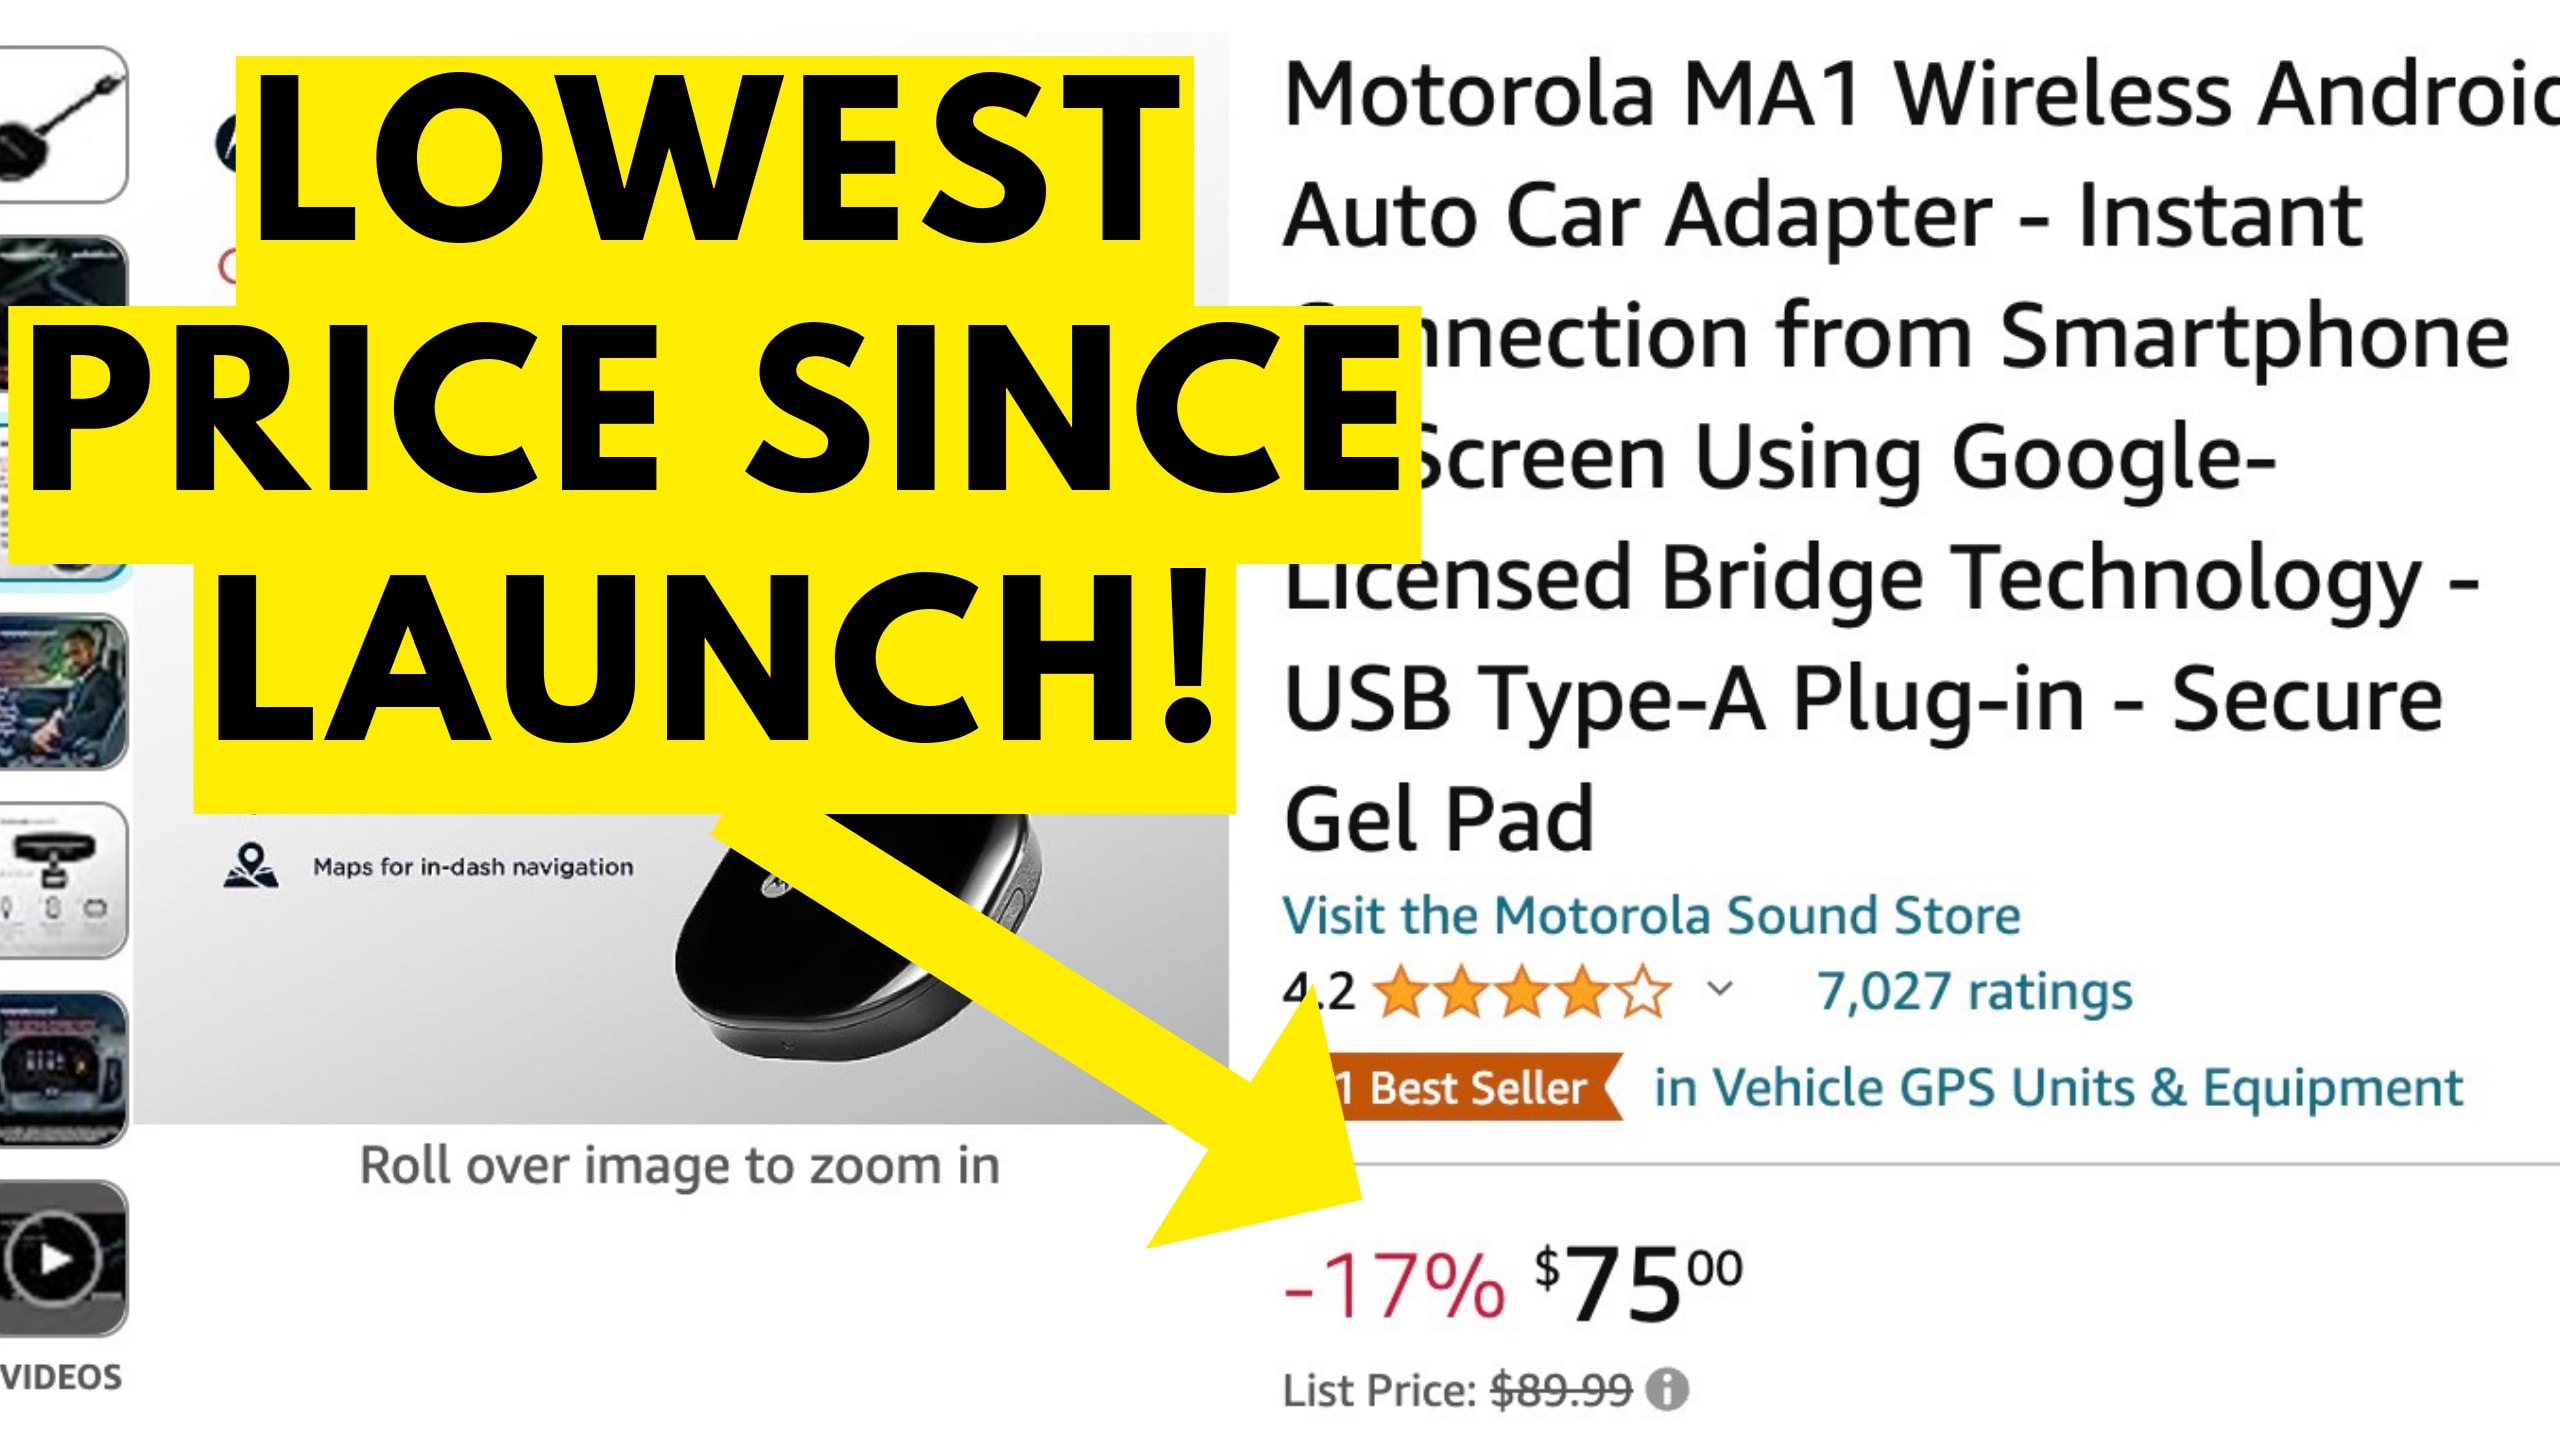 https://s1.cdn.autoevolution.com/images/news/top-android-auto-wireless-adapter-now-significantly-cheaper-lowest-price-since-launch-220930_1.jpg